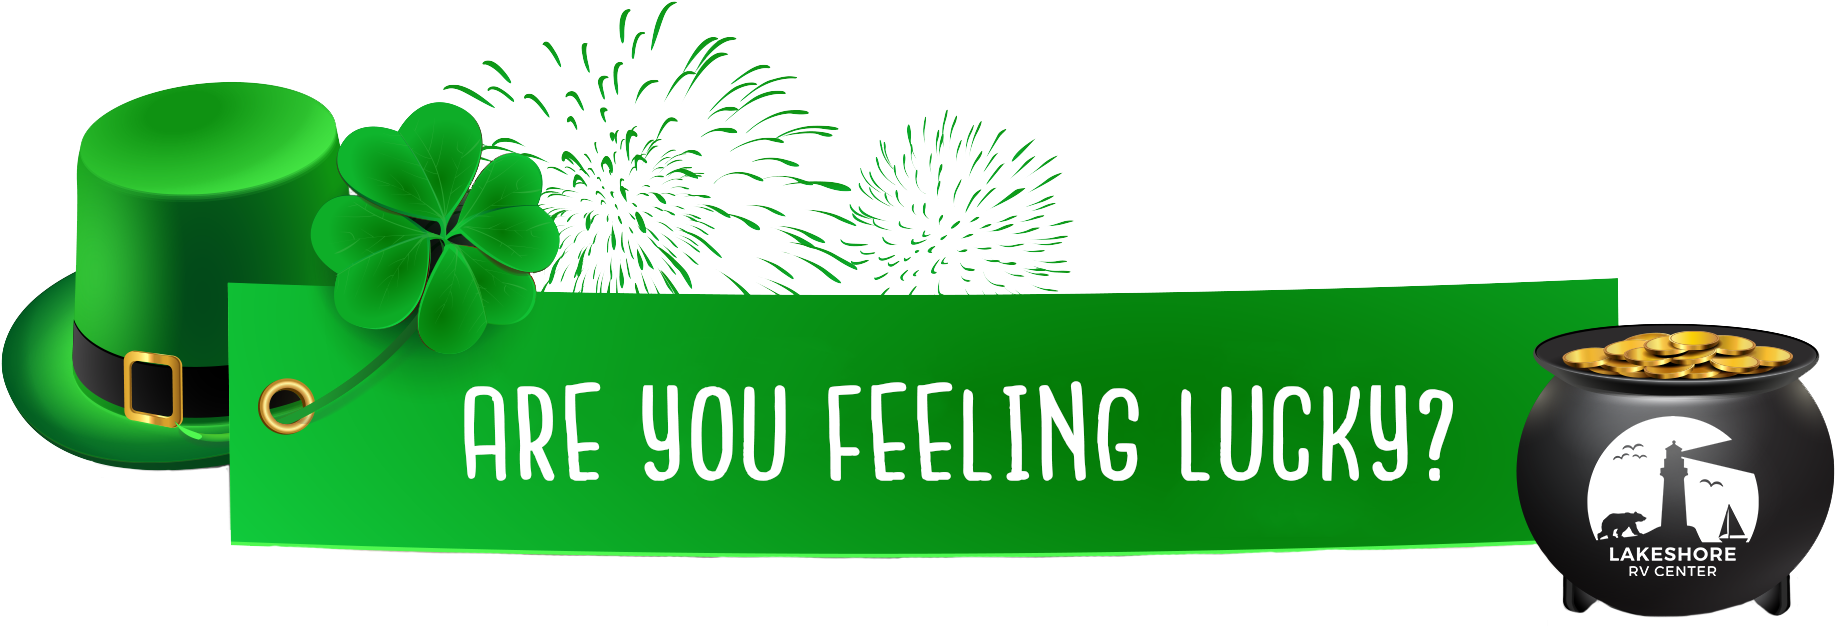 Patrick's Day Is Right Around The Corner Which Means - Feu D Artifice (1920x636)